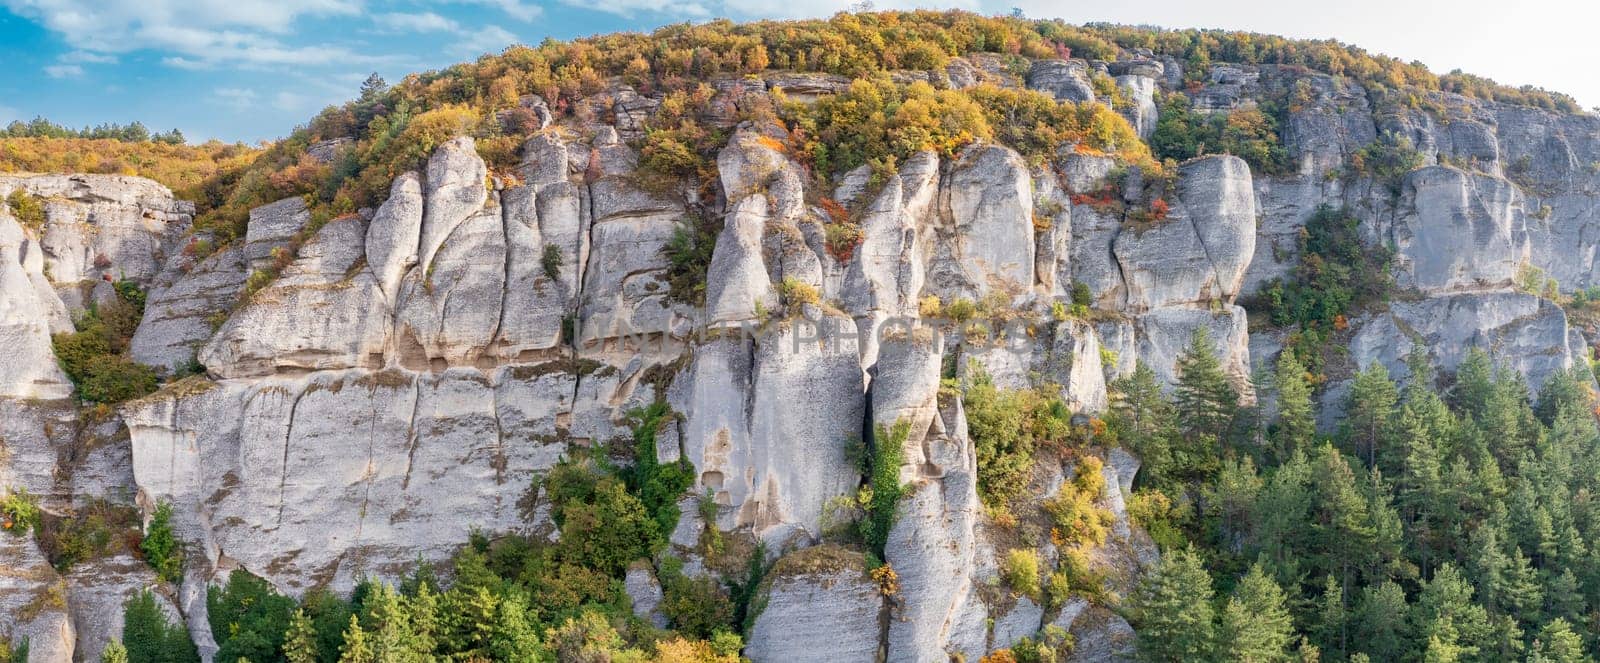 The cliffs Madara in Bulgaria. UNESCO World Heritage Site. by EdVal